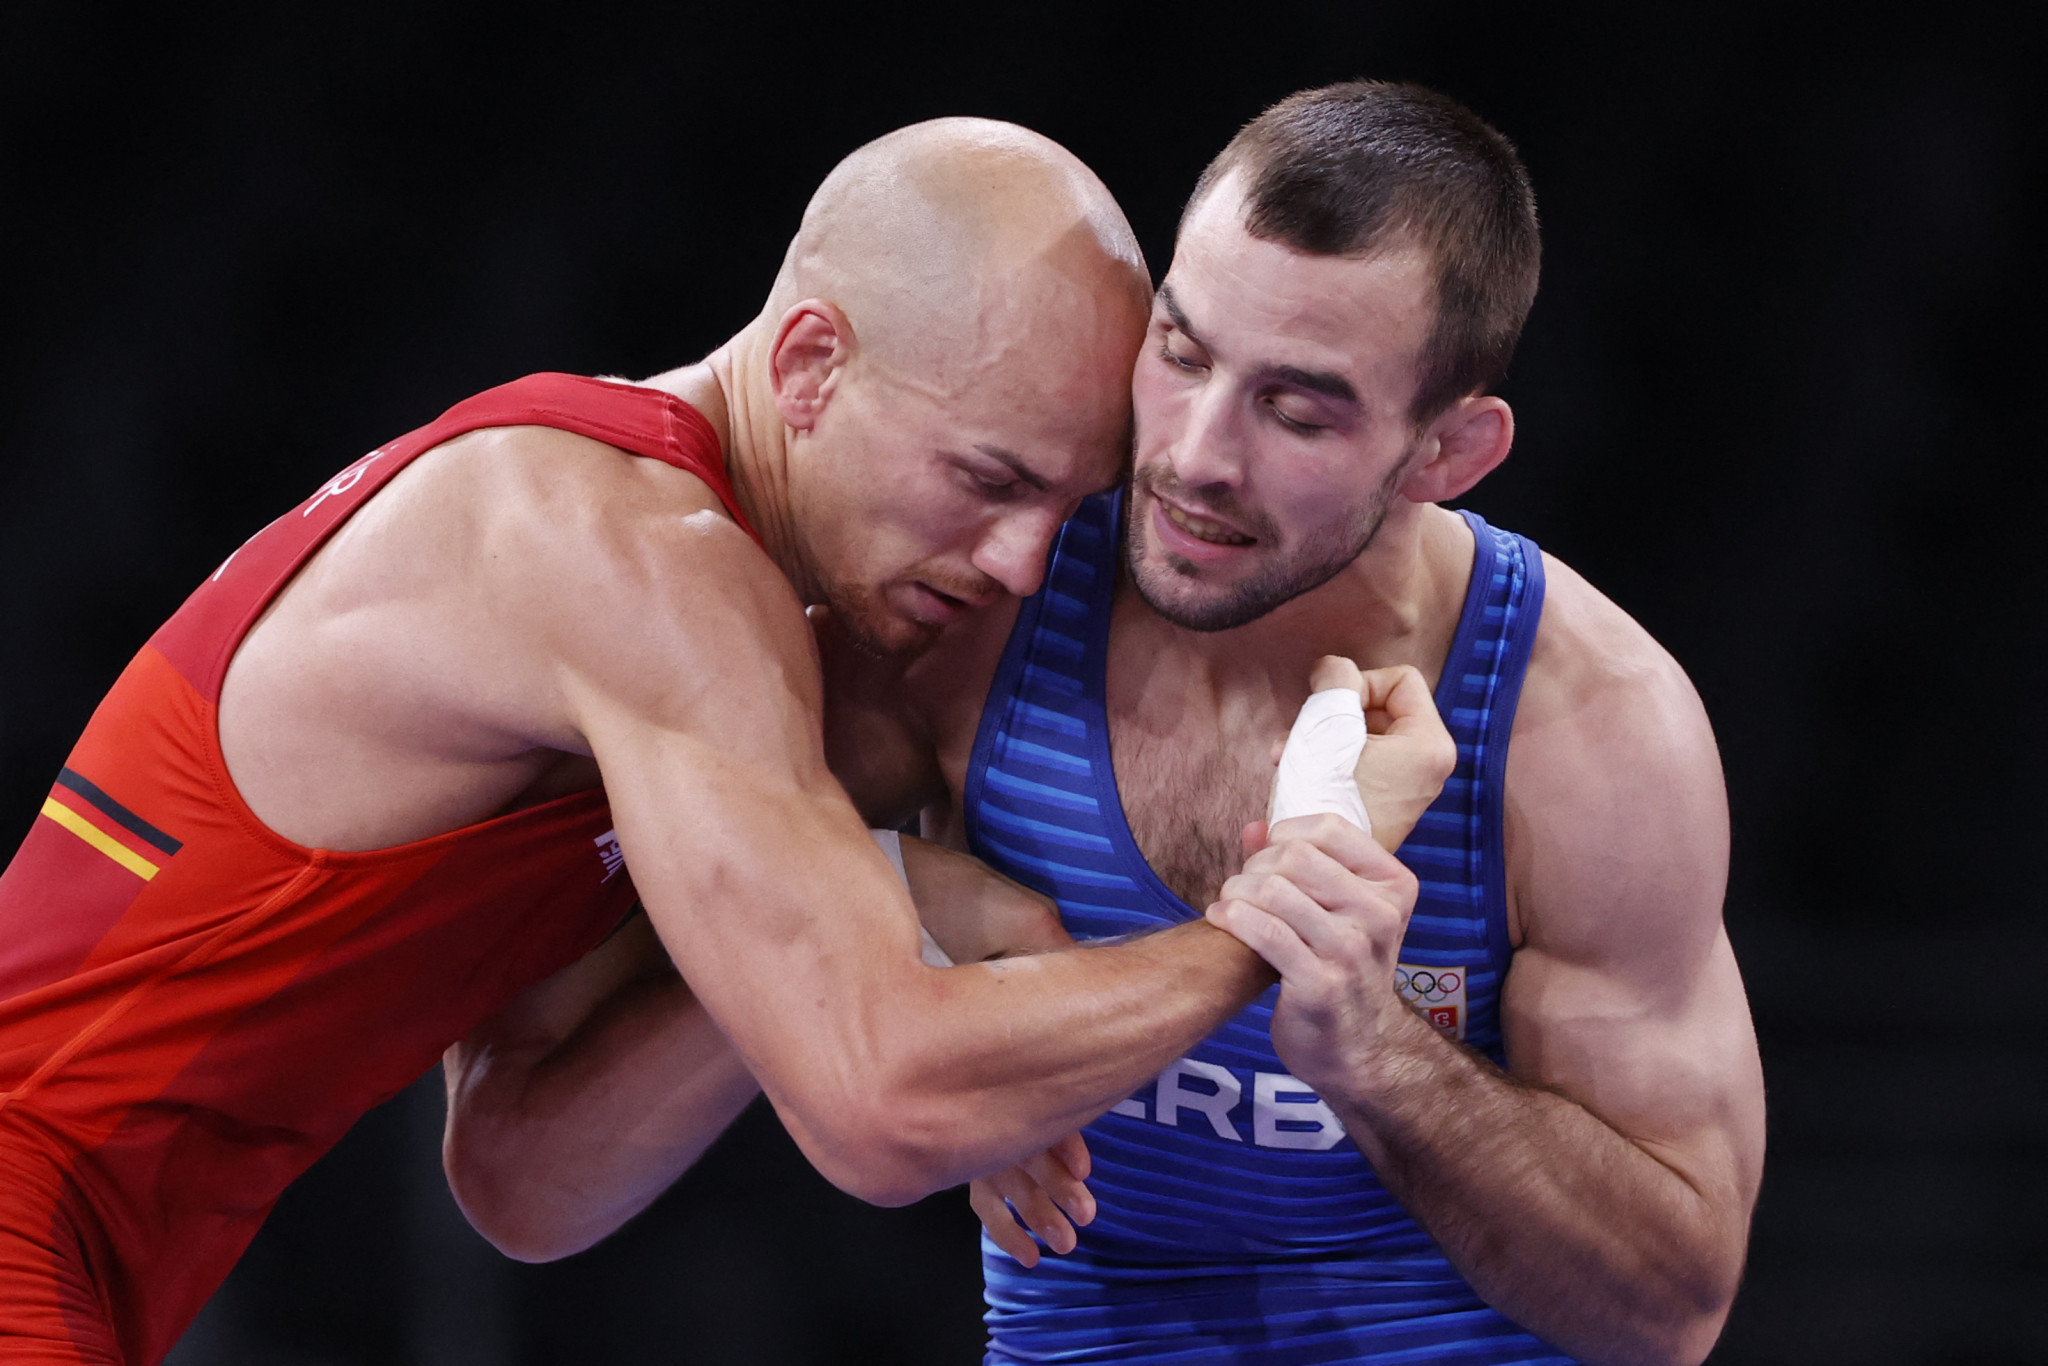 Mate Nemeš, right, has become a world champion after coming out on top in the men's under-67kg class ©Getty Images